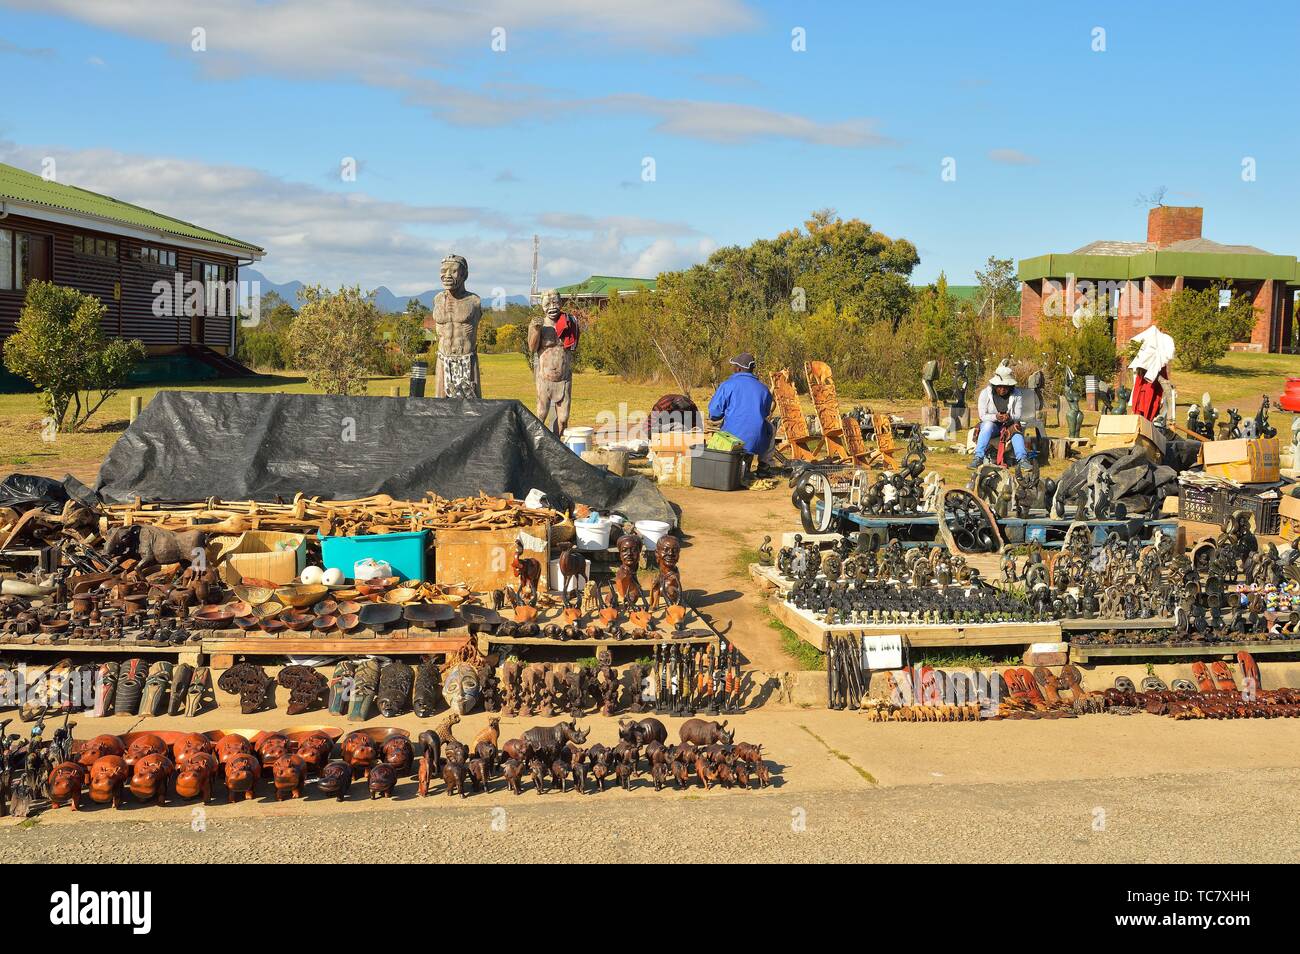 Souvenirs for tourists near Mossel Bay, South Africa Stock Photo